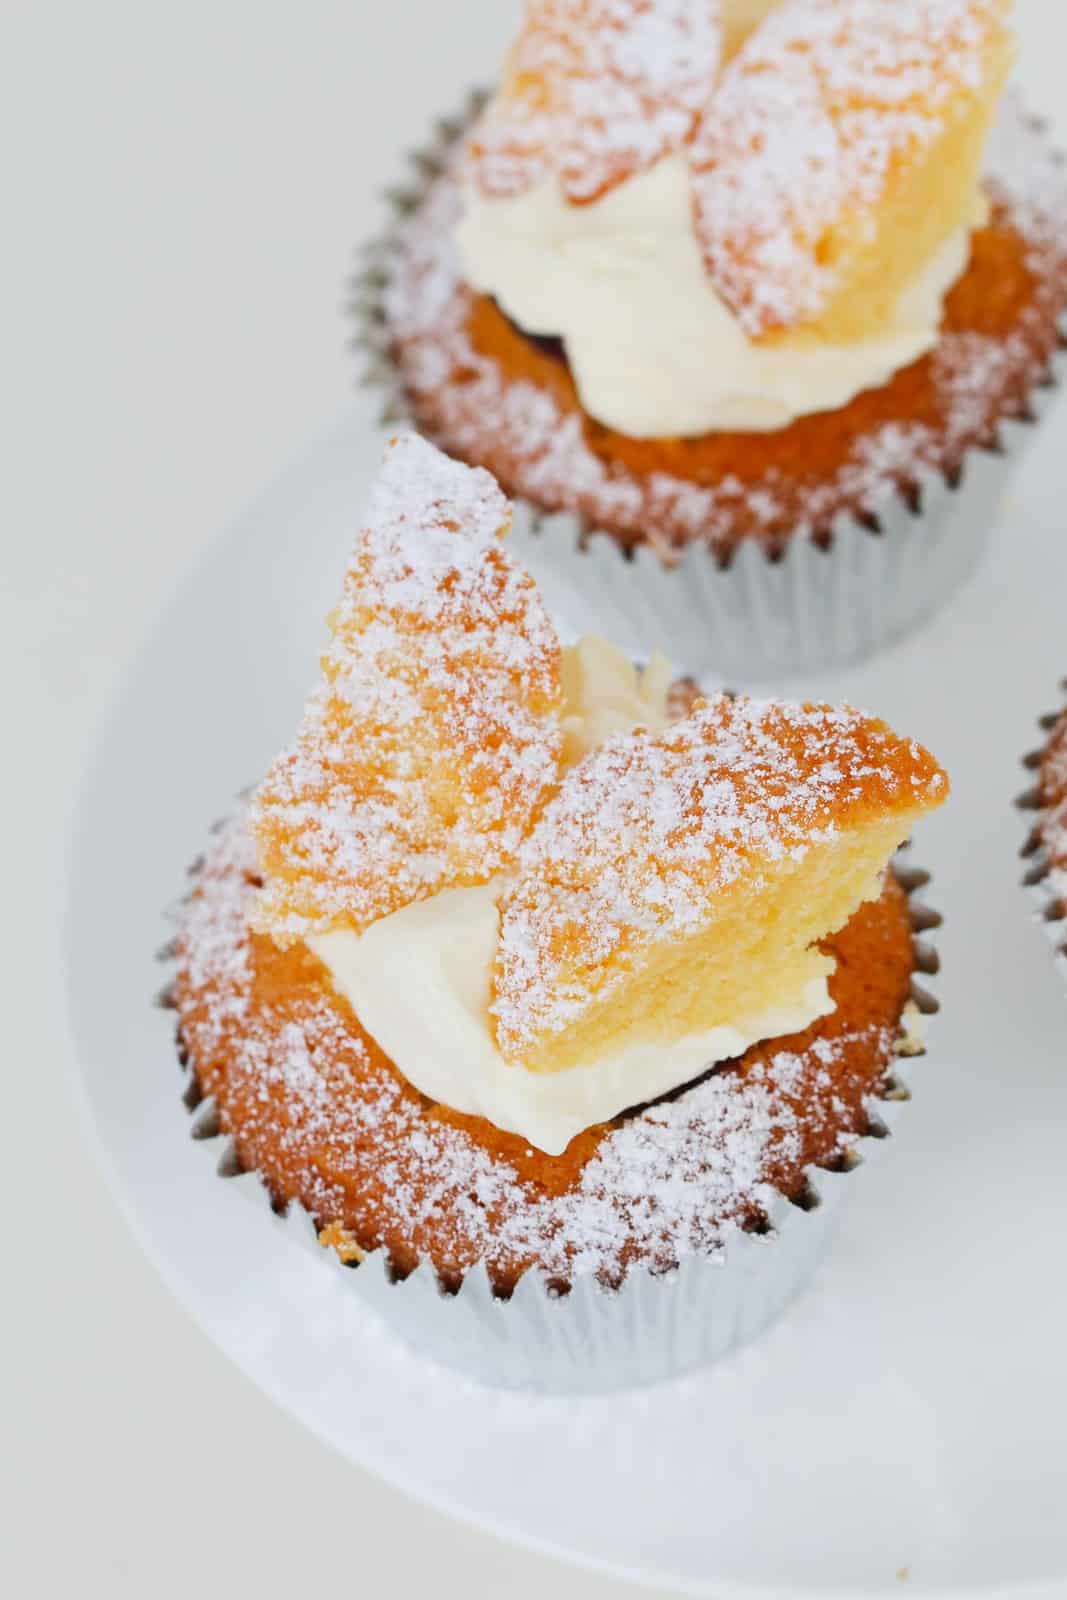 A butterfly cupcake filled with jam and cream and dusted with icing sugar on a white cake stand.